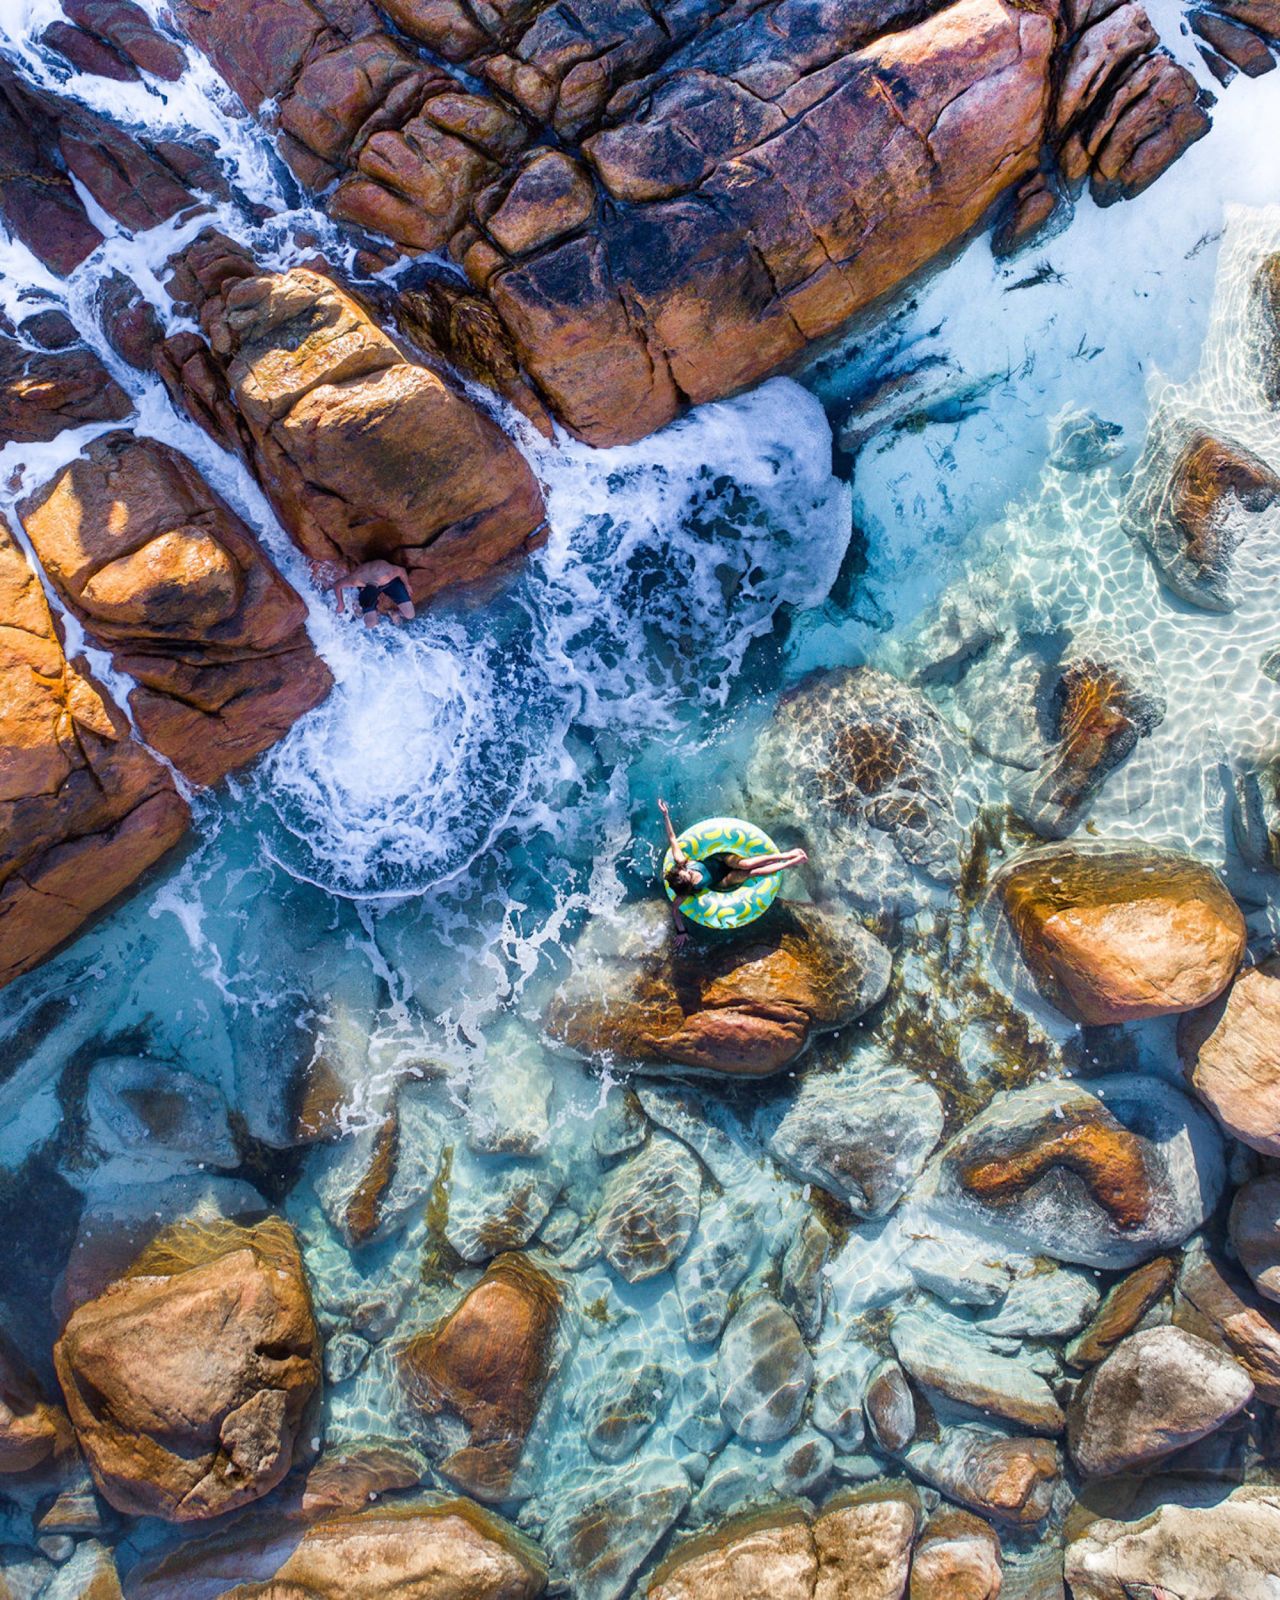 <strong>Wyadup Spa, Western Australia:</strong> The grand prize winner of the "Australia From Above" competition, this photograph by <a href="https://www.skypixel.com/user/contact-72b71c90-9f6f-44e6-b07f-eaf800c749a0" target="_blank" target="_blank">Kyle Bowman</a> was taken in Western Australia's Margaret River region. "Love the playful nature of this photo," said judges. "The intense contrast of the reds and greens give this image a vivid vibrancy. And it's not just an abstract photo; the person is the focal point and it cleverly shows a person interacting with the Australian environment." 